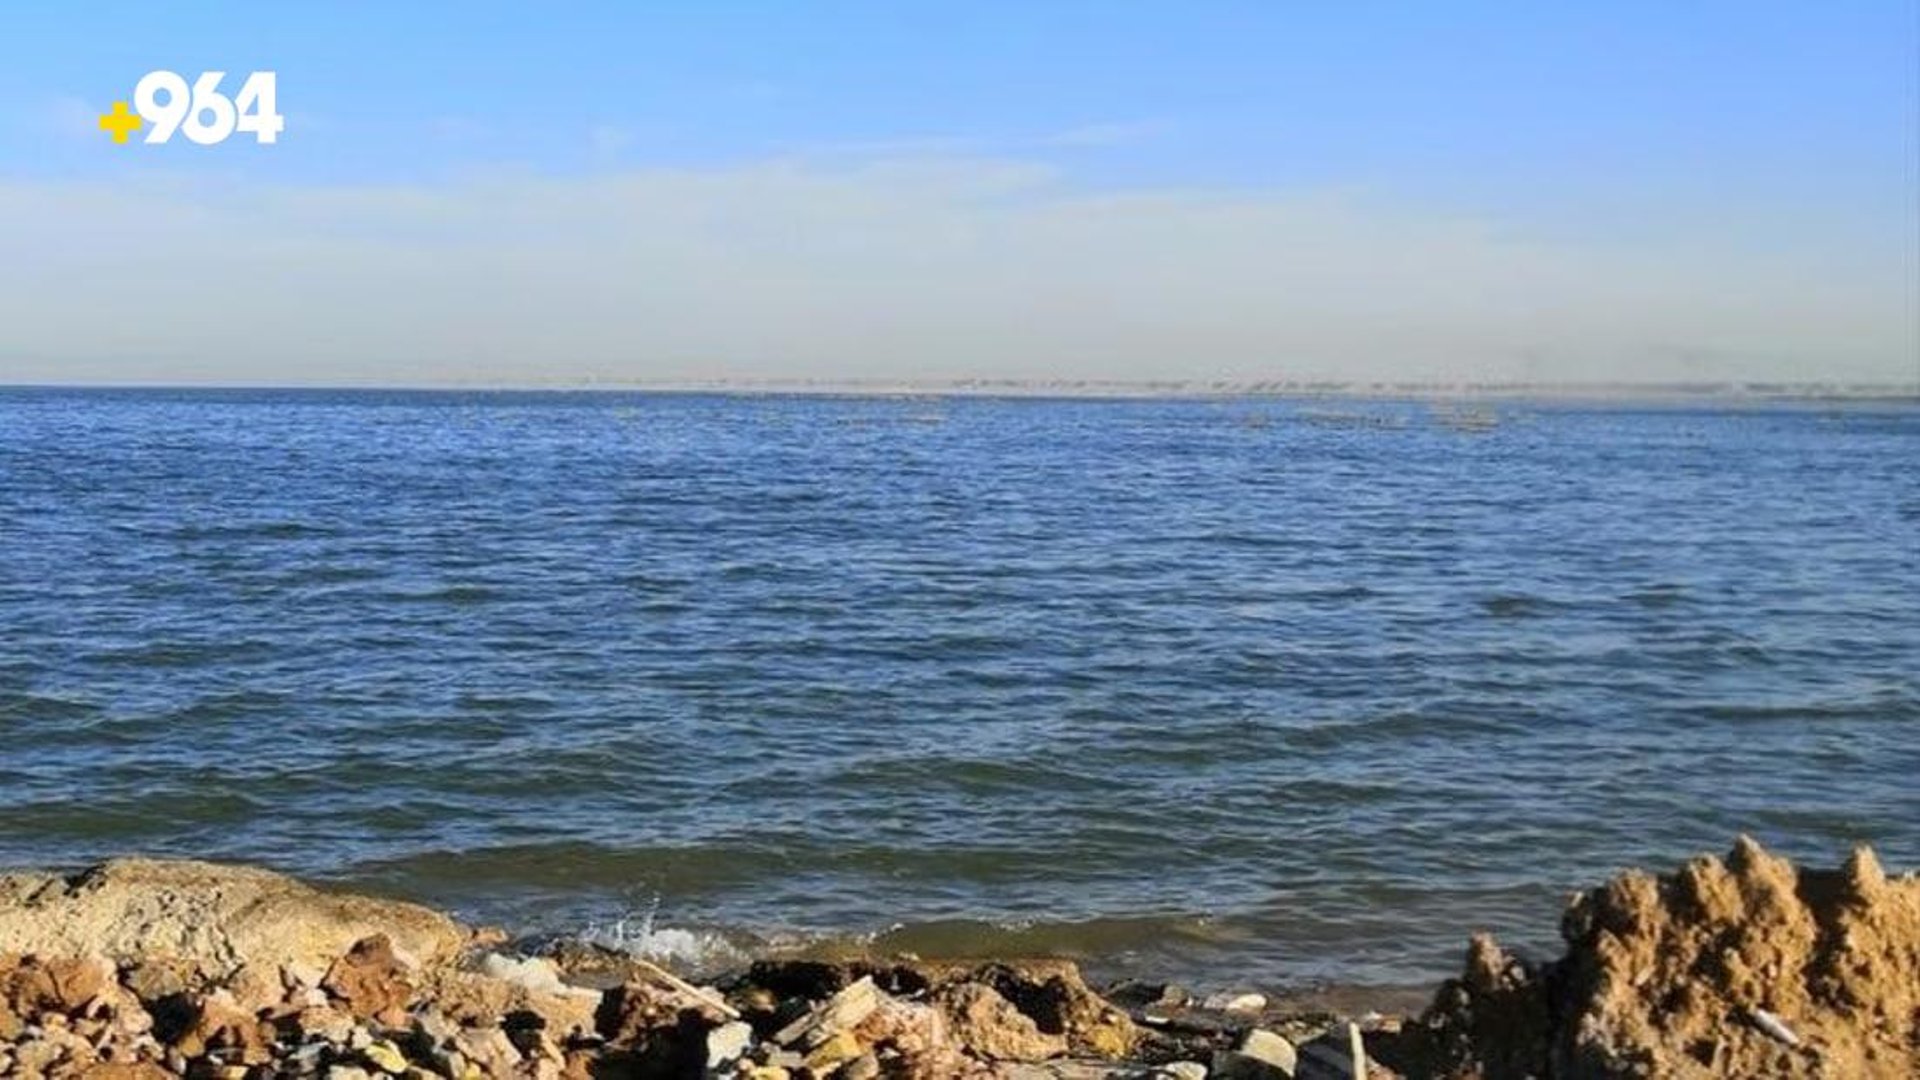 Environmental agency confirms low water levels in Najaf Sea due to water scarcity